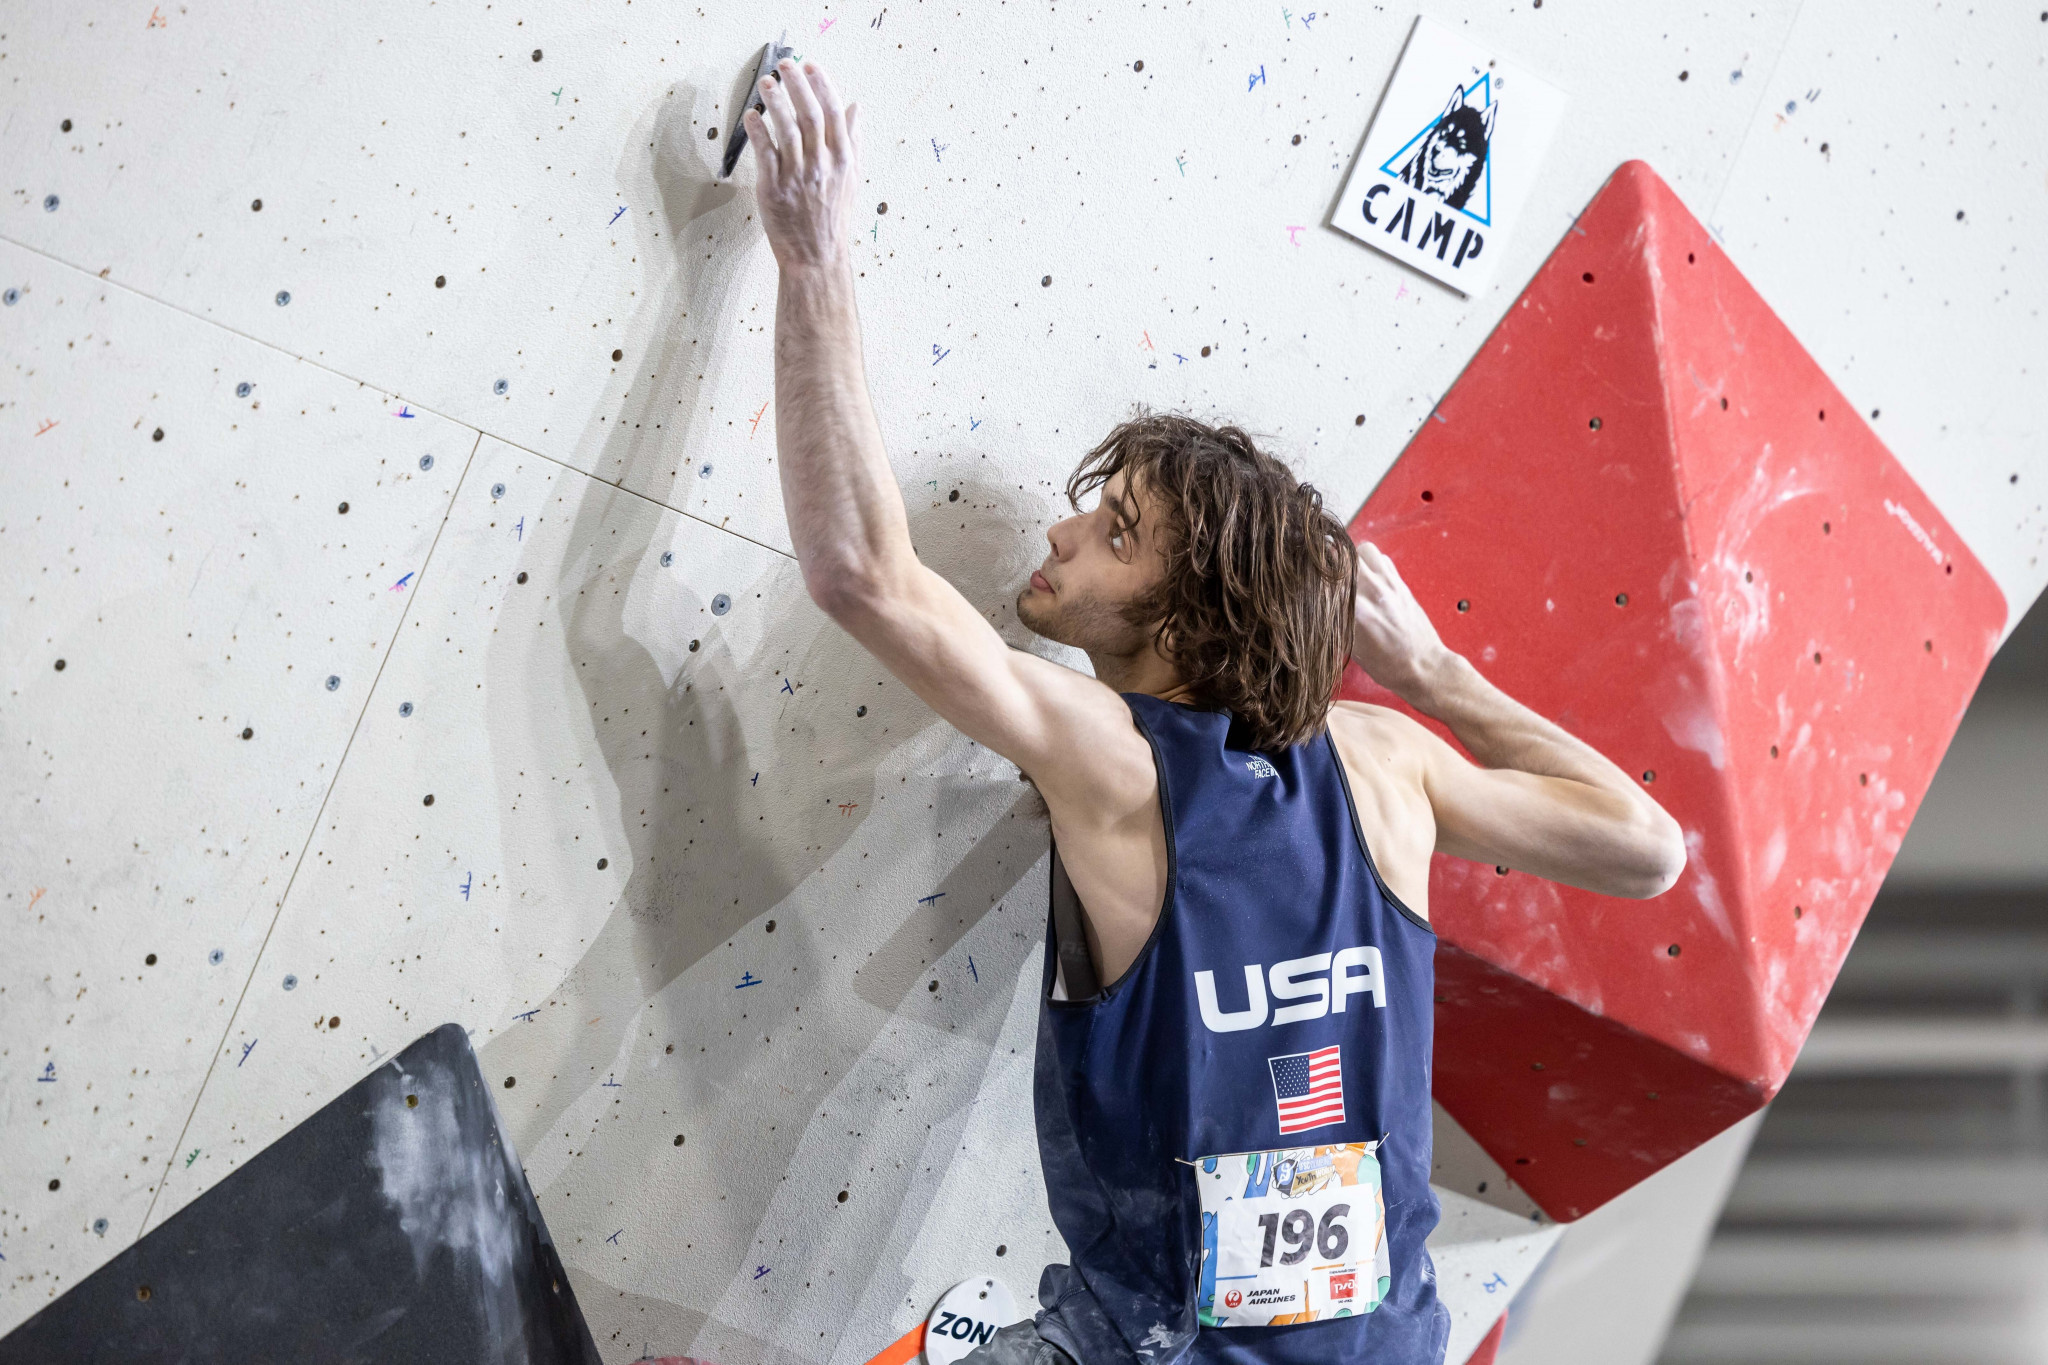 Isaac Leff of the United States competes at last year's IFSC Youth World Championships in Voronezh ©Jan Virt/IFSC